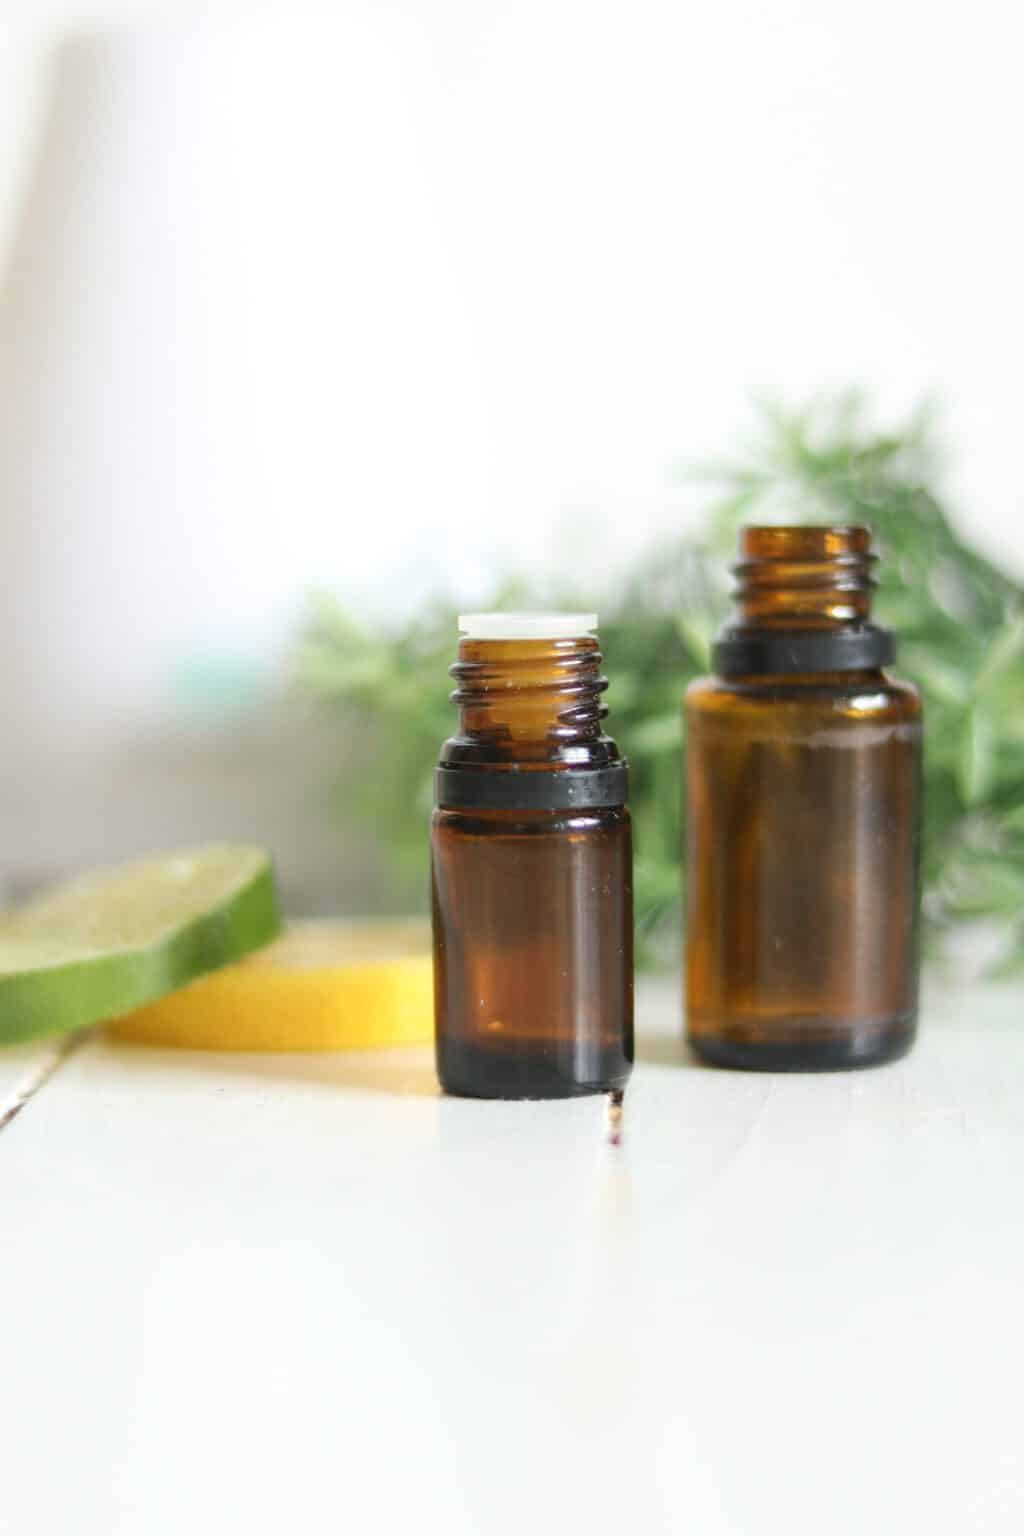 10ml and 15ml essential oil bottles with fresh lime and lemon slices.